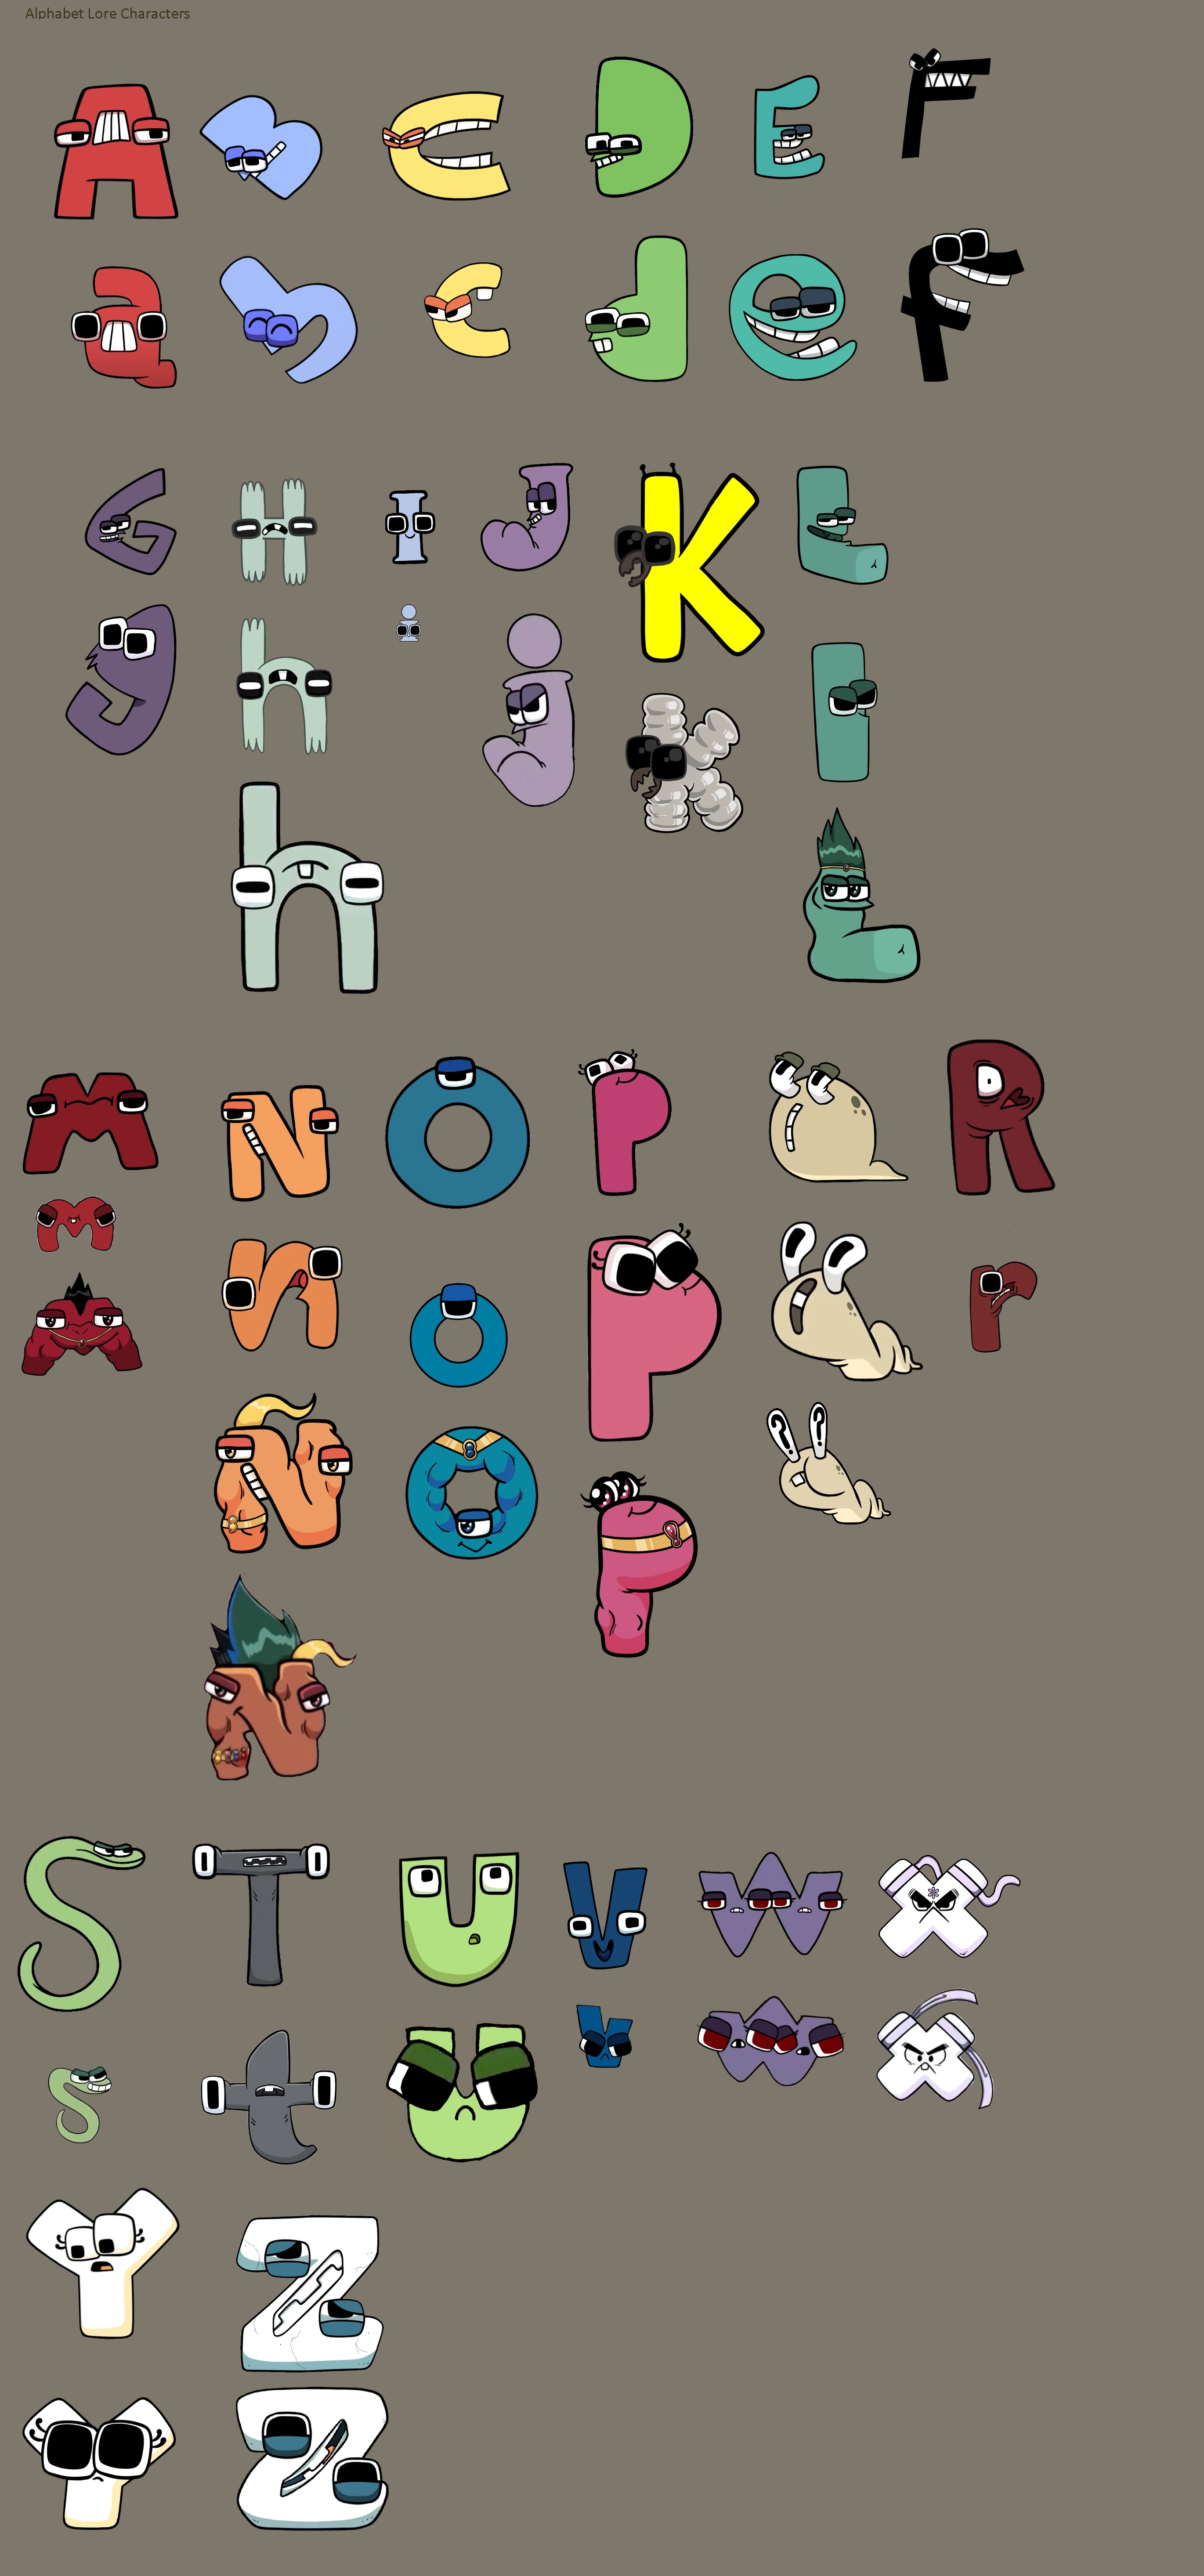 A-G Alphabet lore Characters from BrickLink Studio